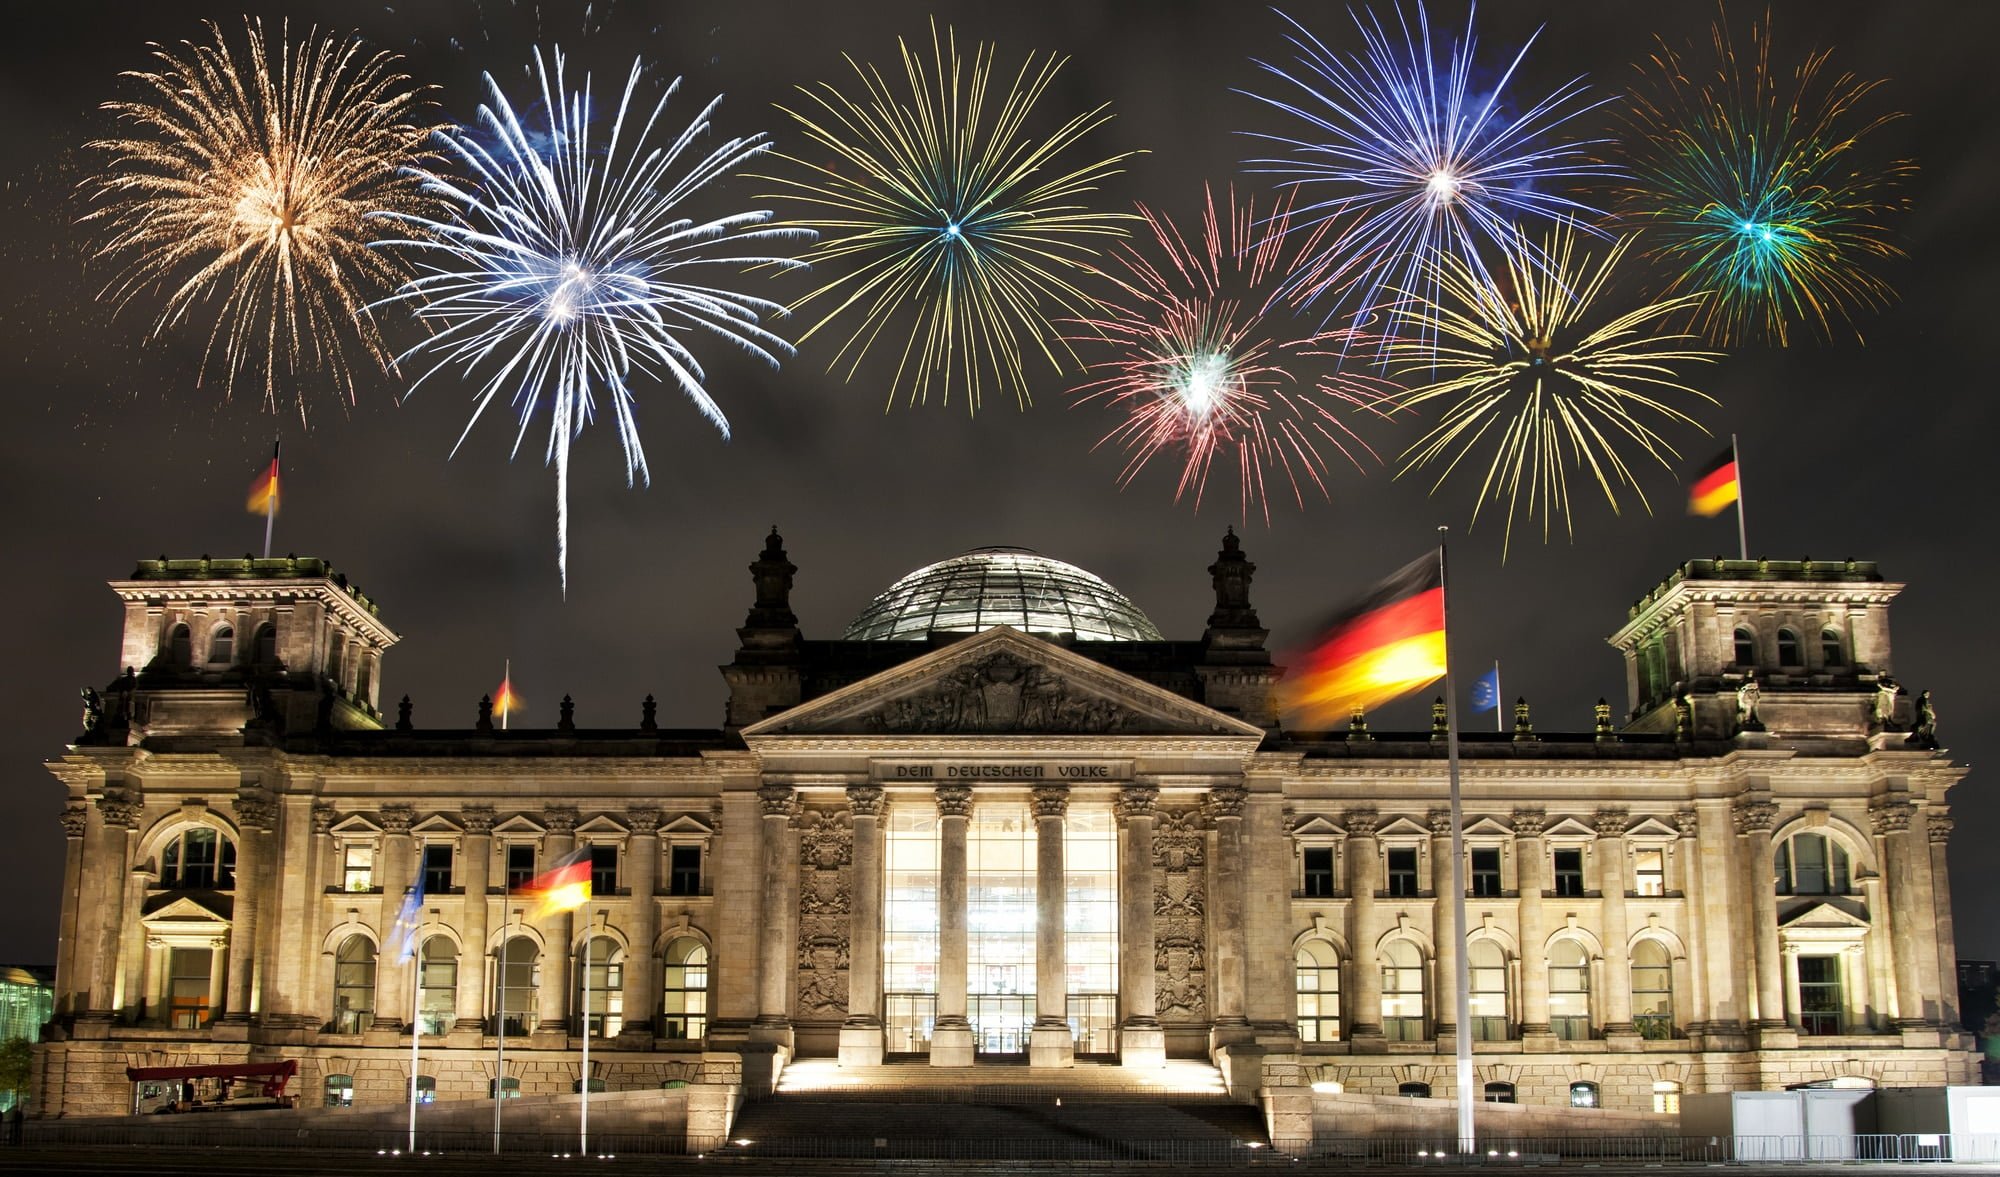 Fireworks over Berlin Parliament (Reichstag), Germany